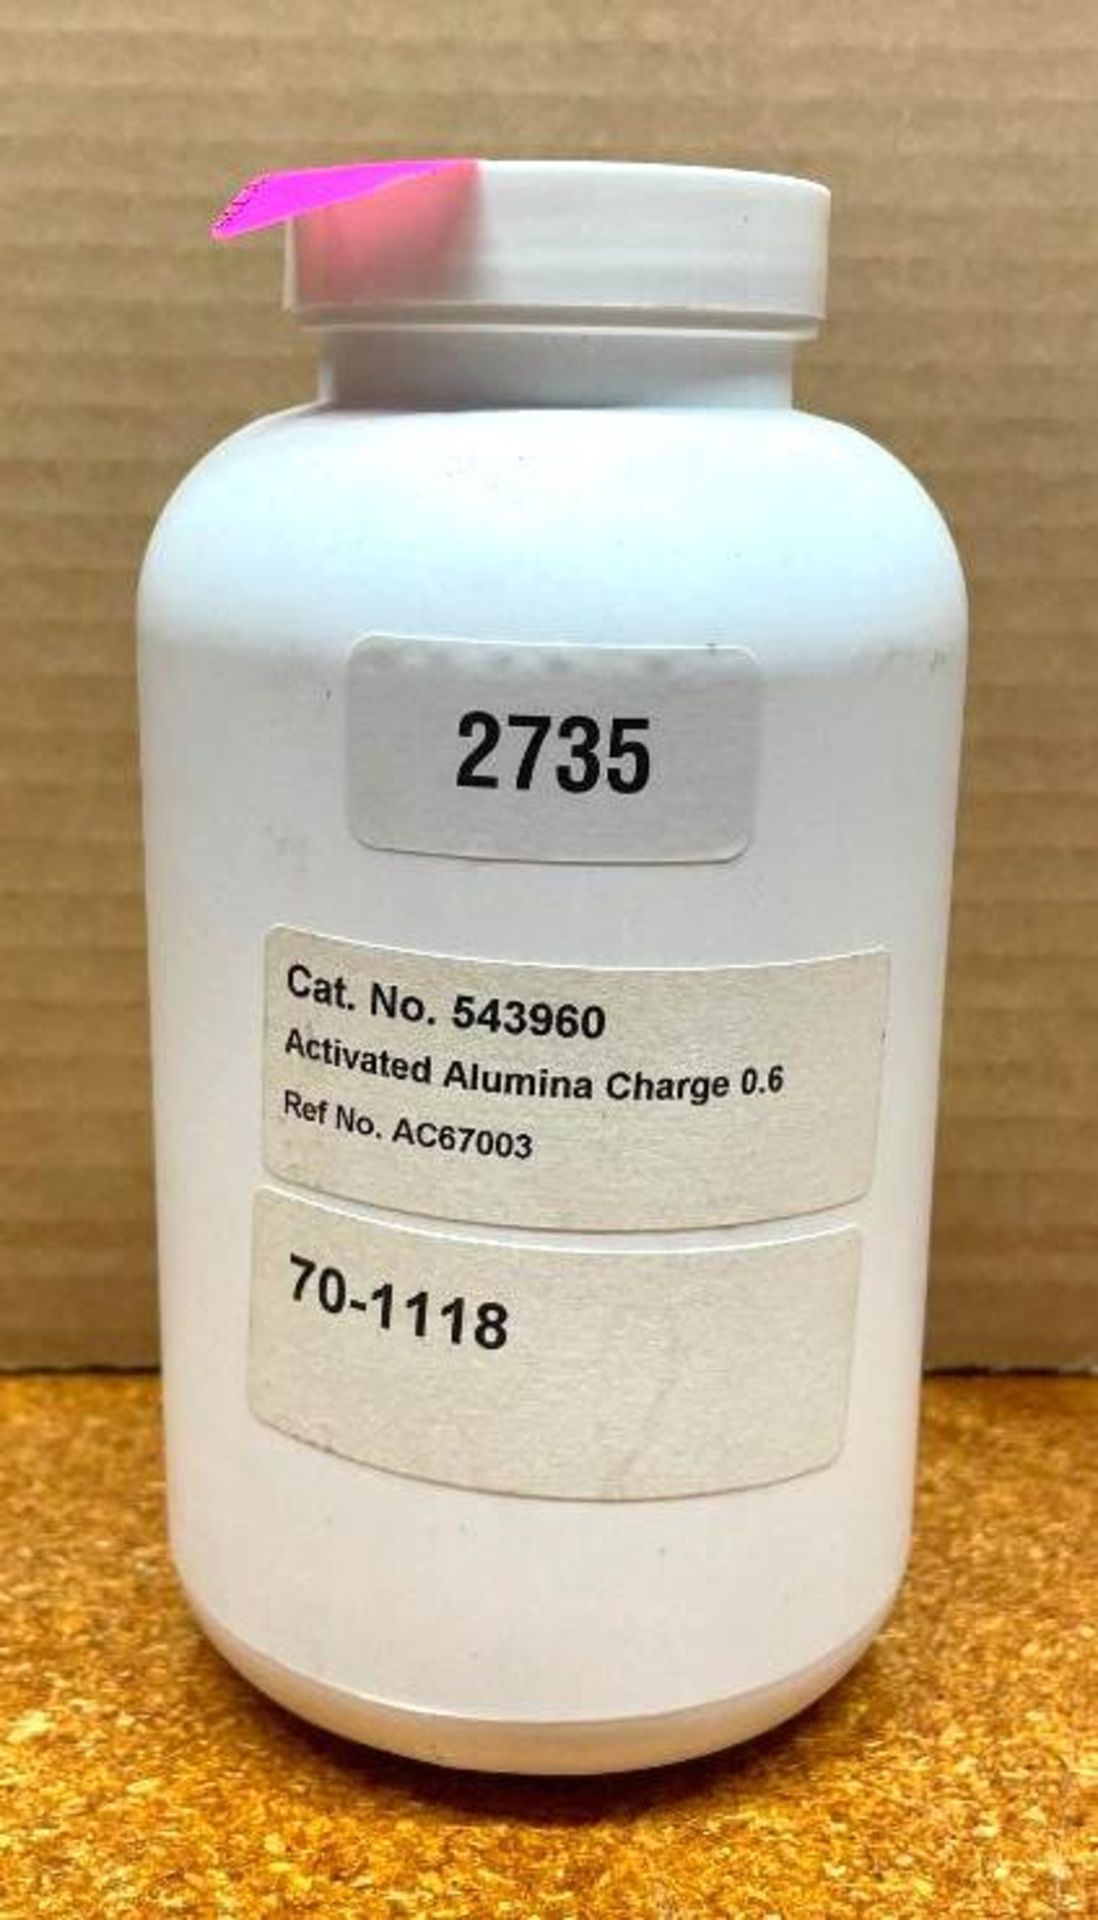 JAR OF ACTIVATED ALUMINA CHARGE BRAND/MODEL: 70-1118 INFORMATION: 0.6 QTY: 1